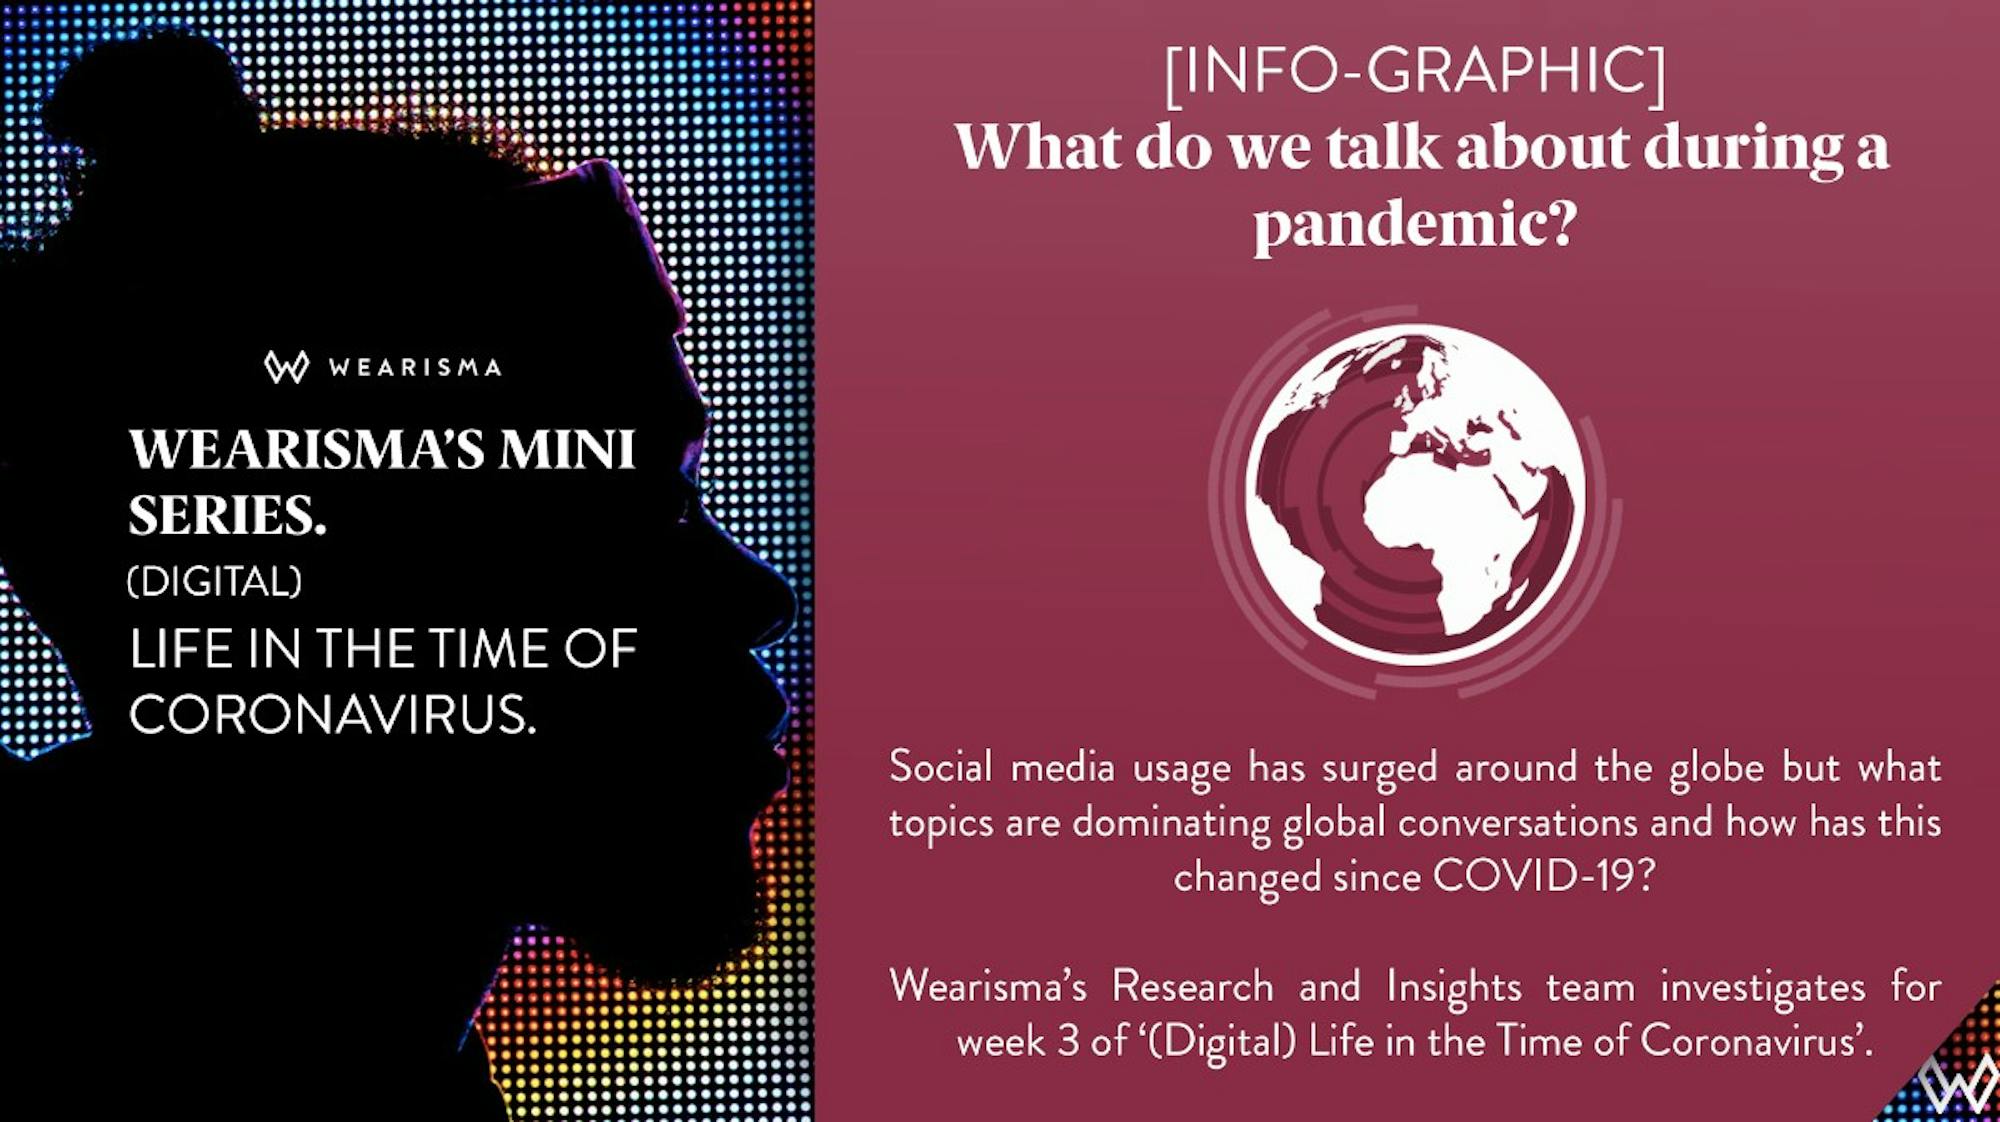 'What we talk about during a pandemic'  Insights from Wearisma 